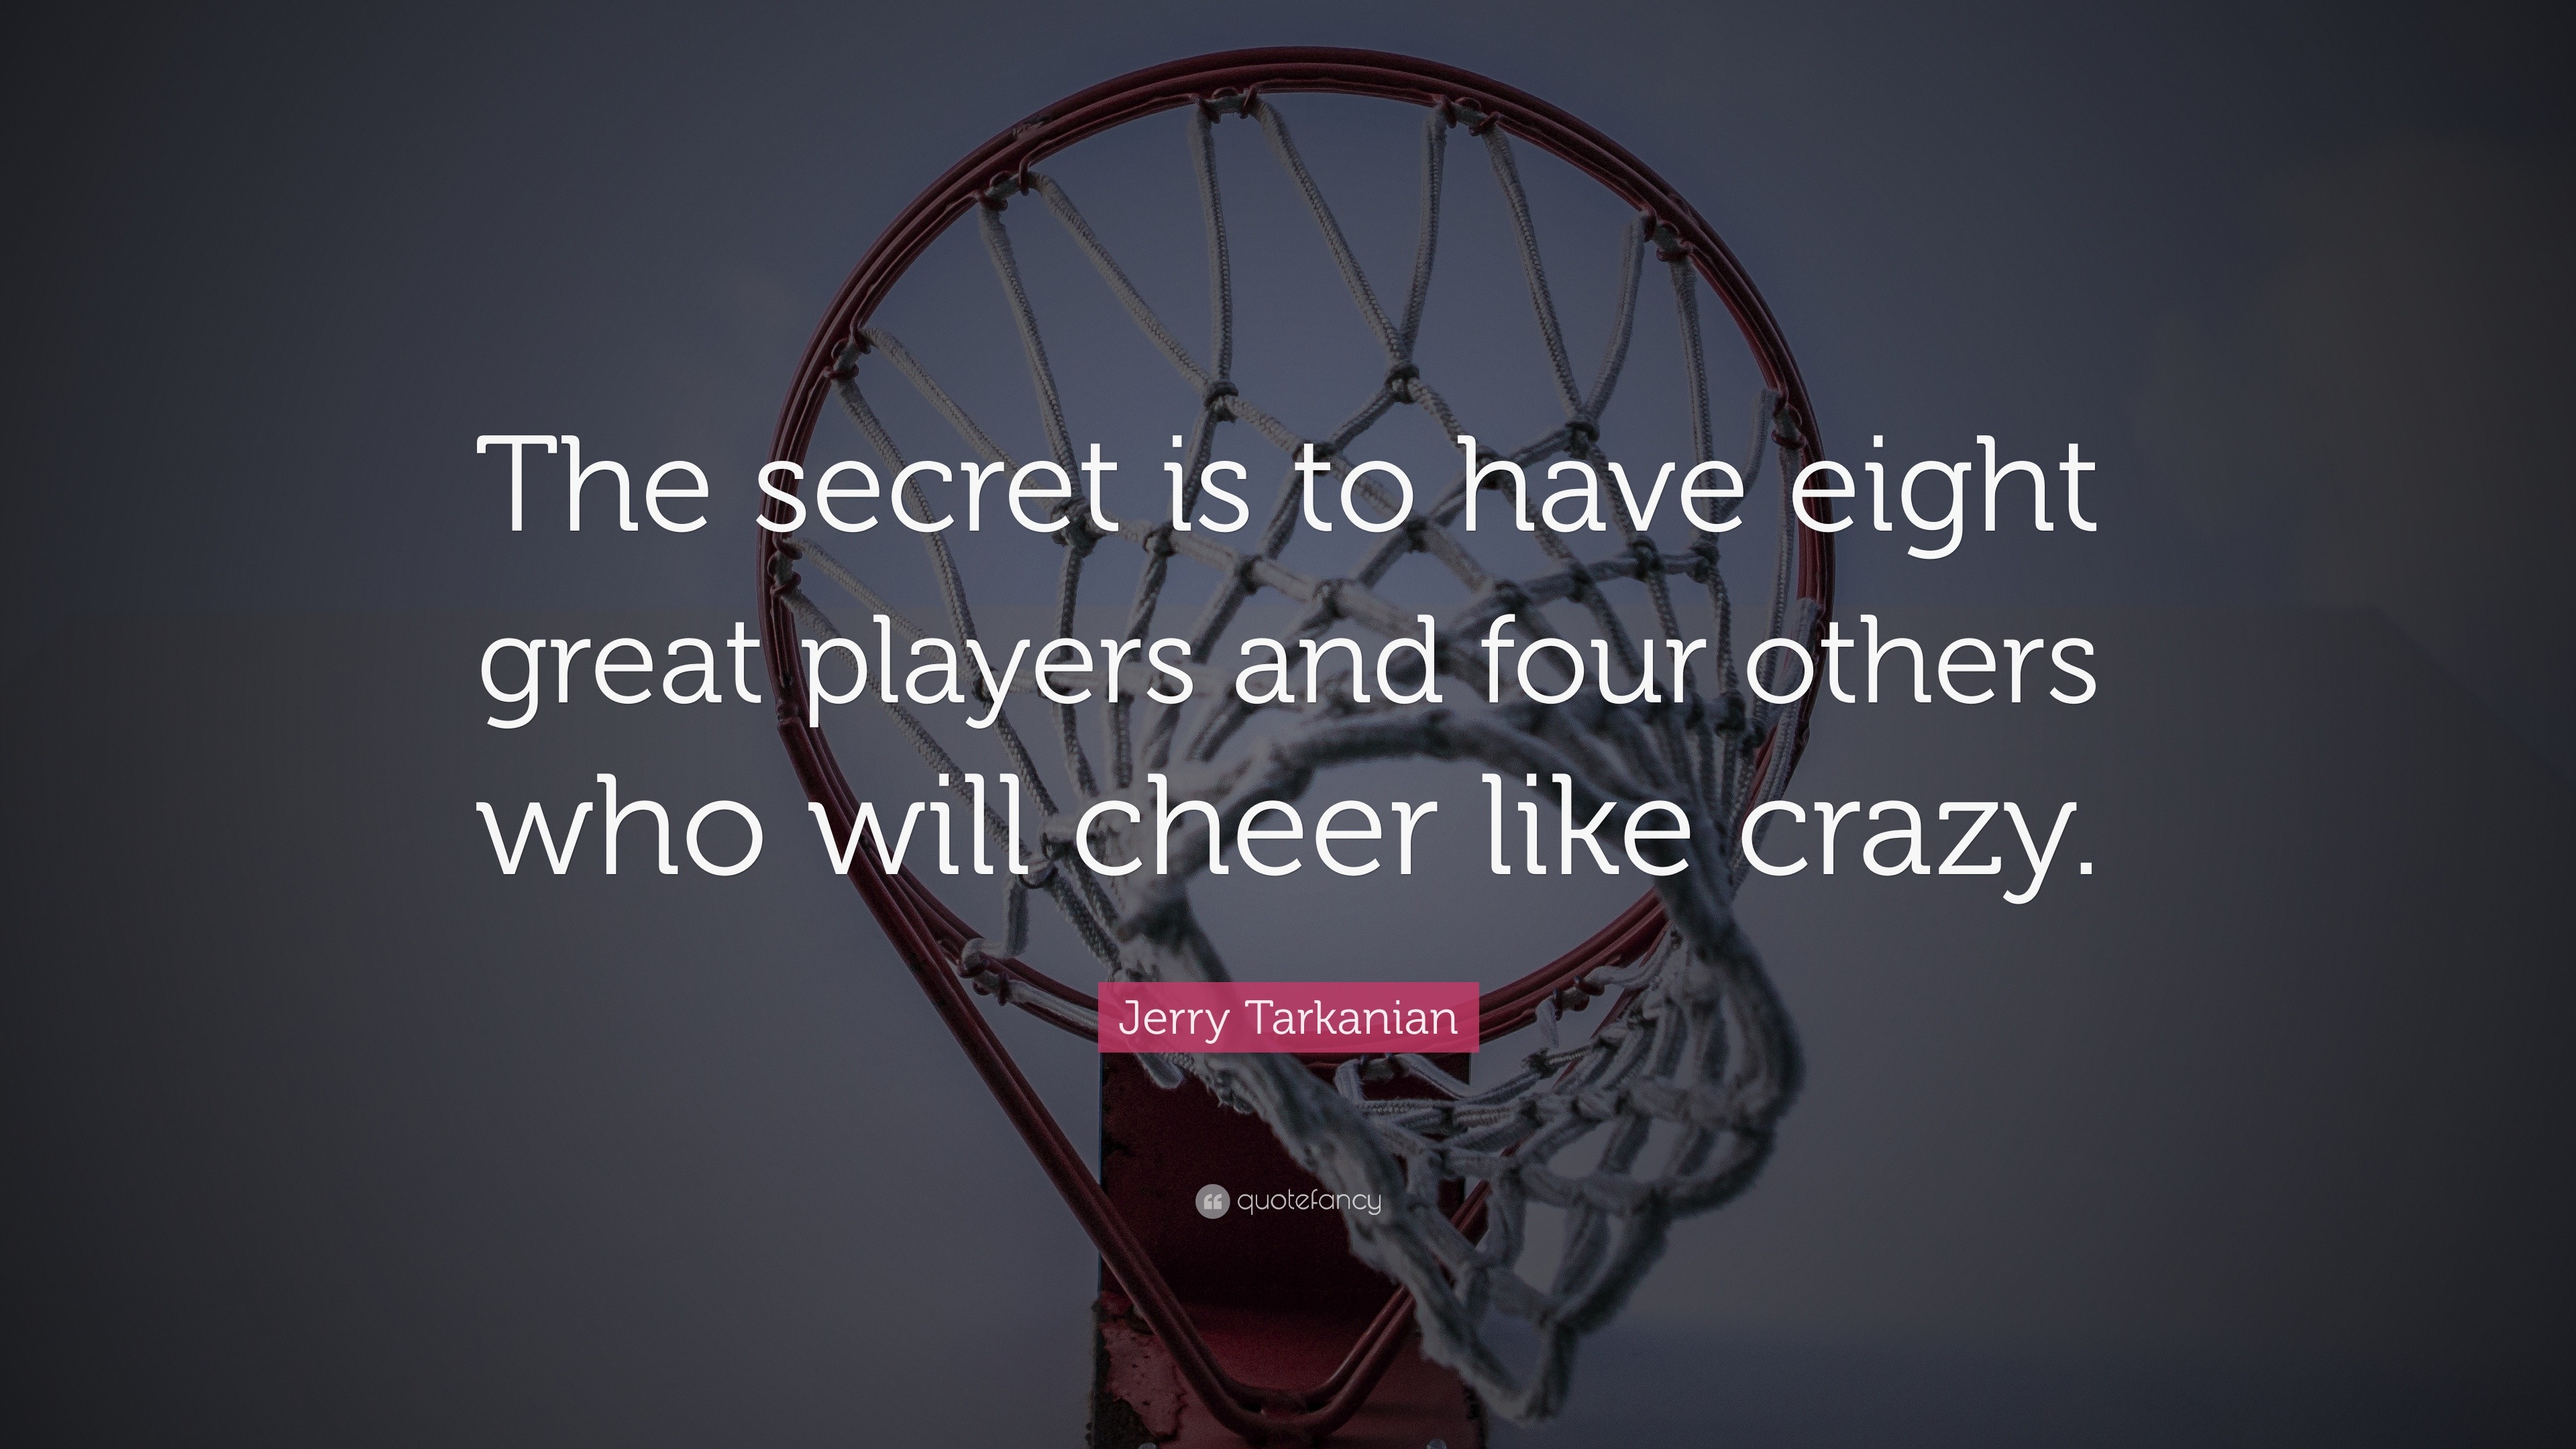 Jerry Tarkanian Quote: “The secret is to have eight great players and ...